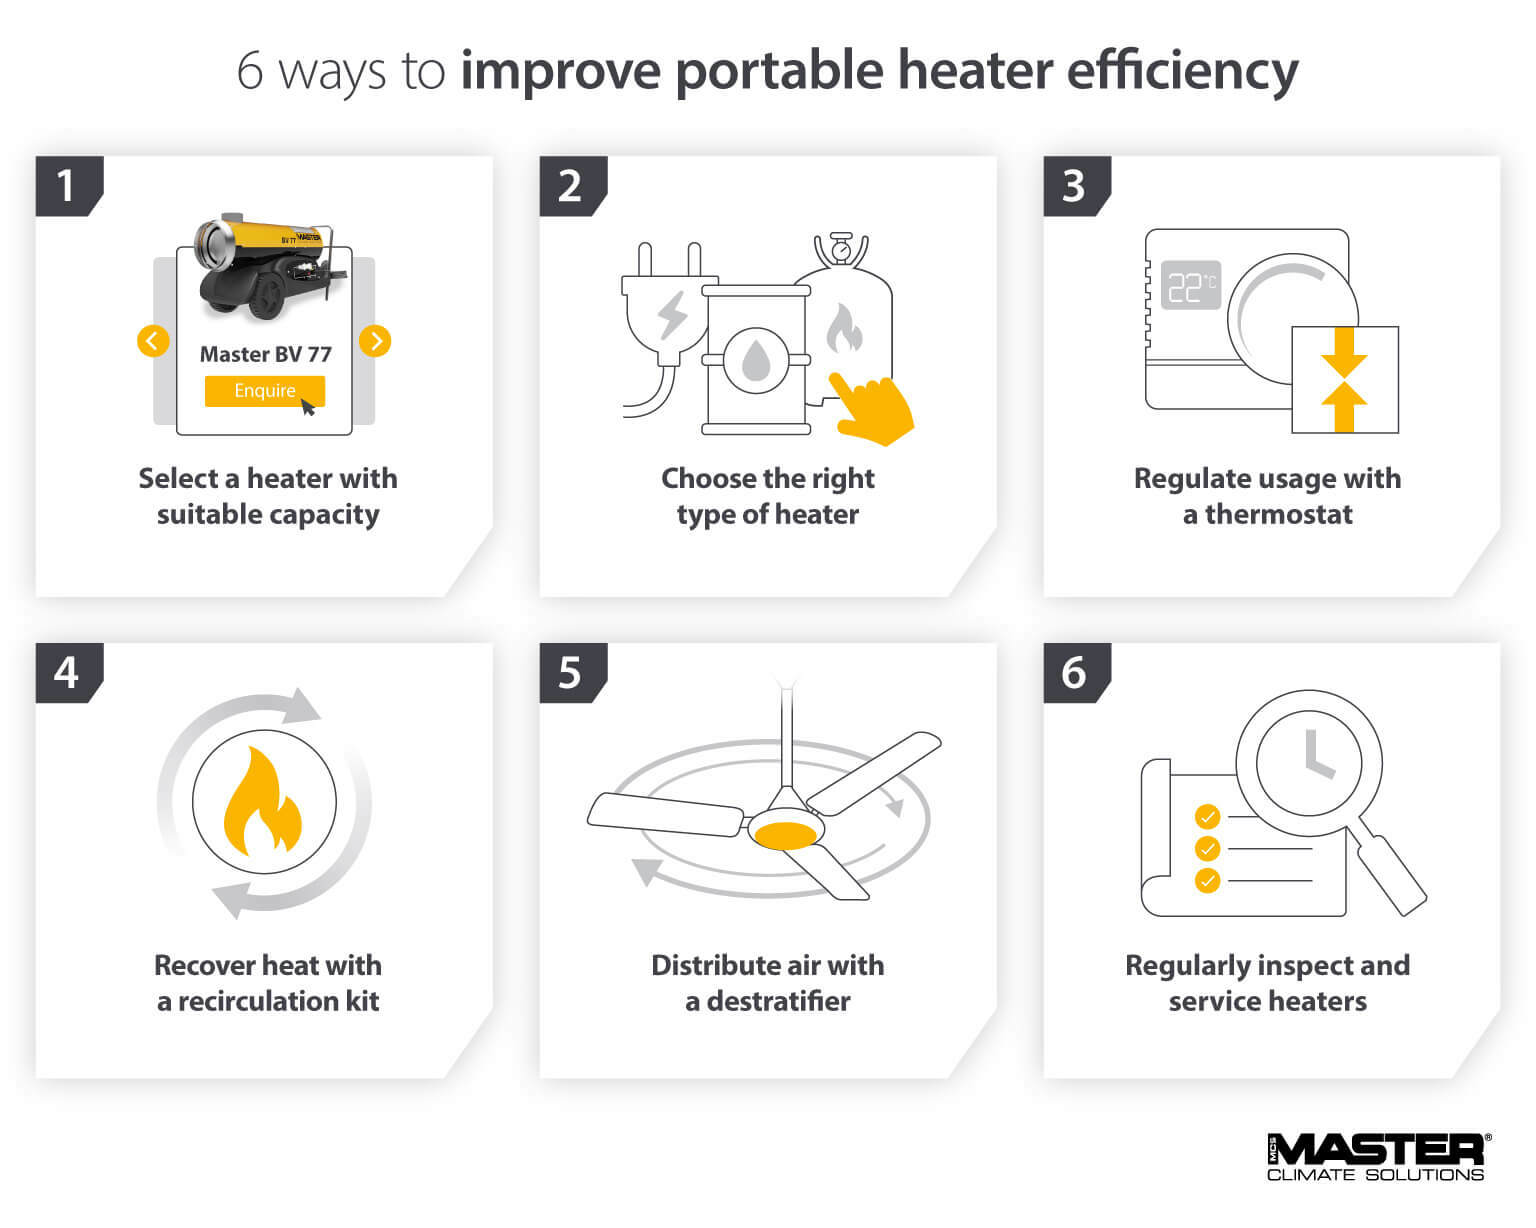 How to maximise the energy efficiency of portable heaters - Master infographic image